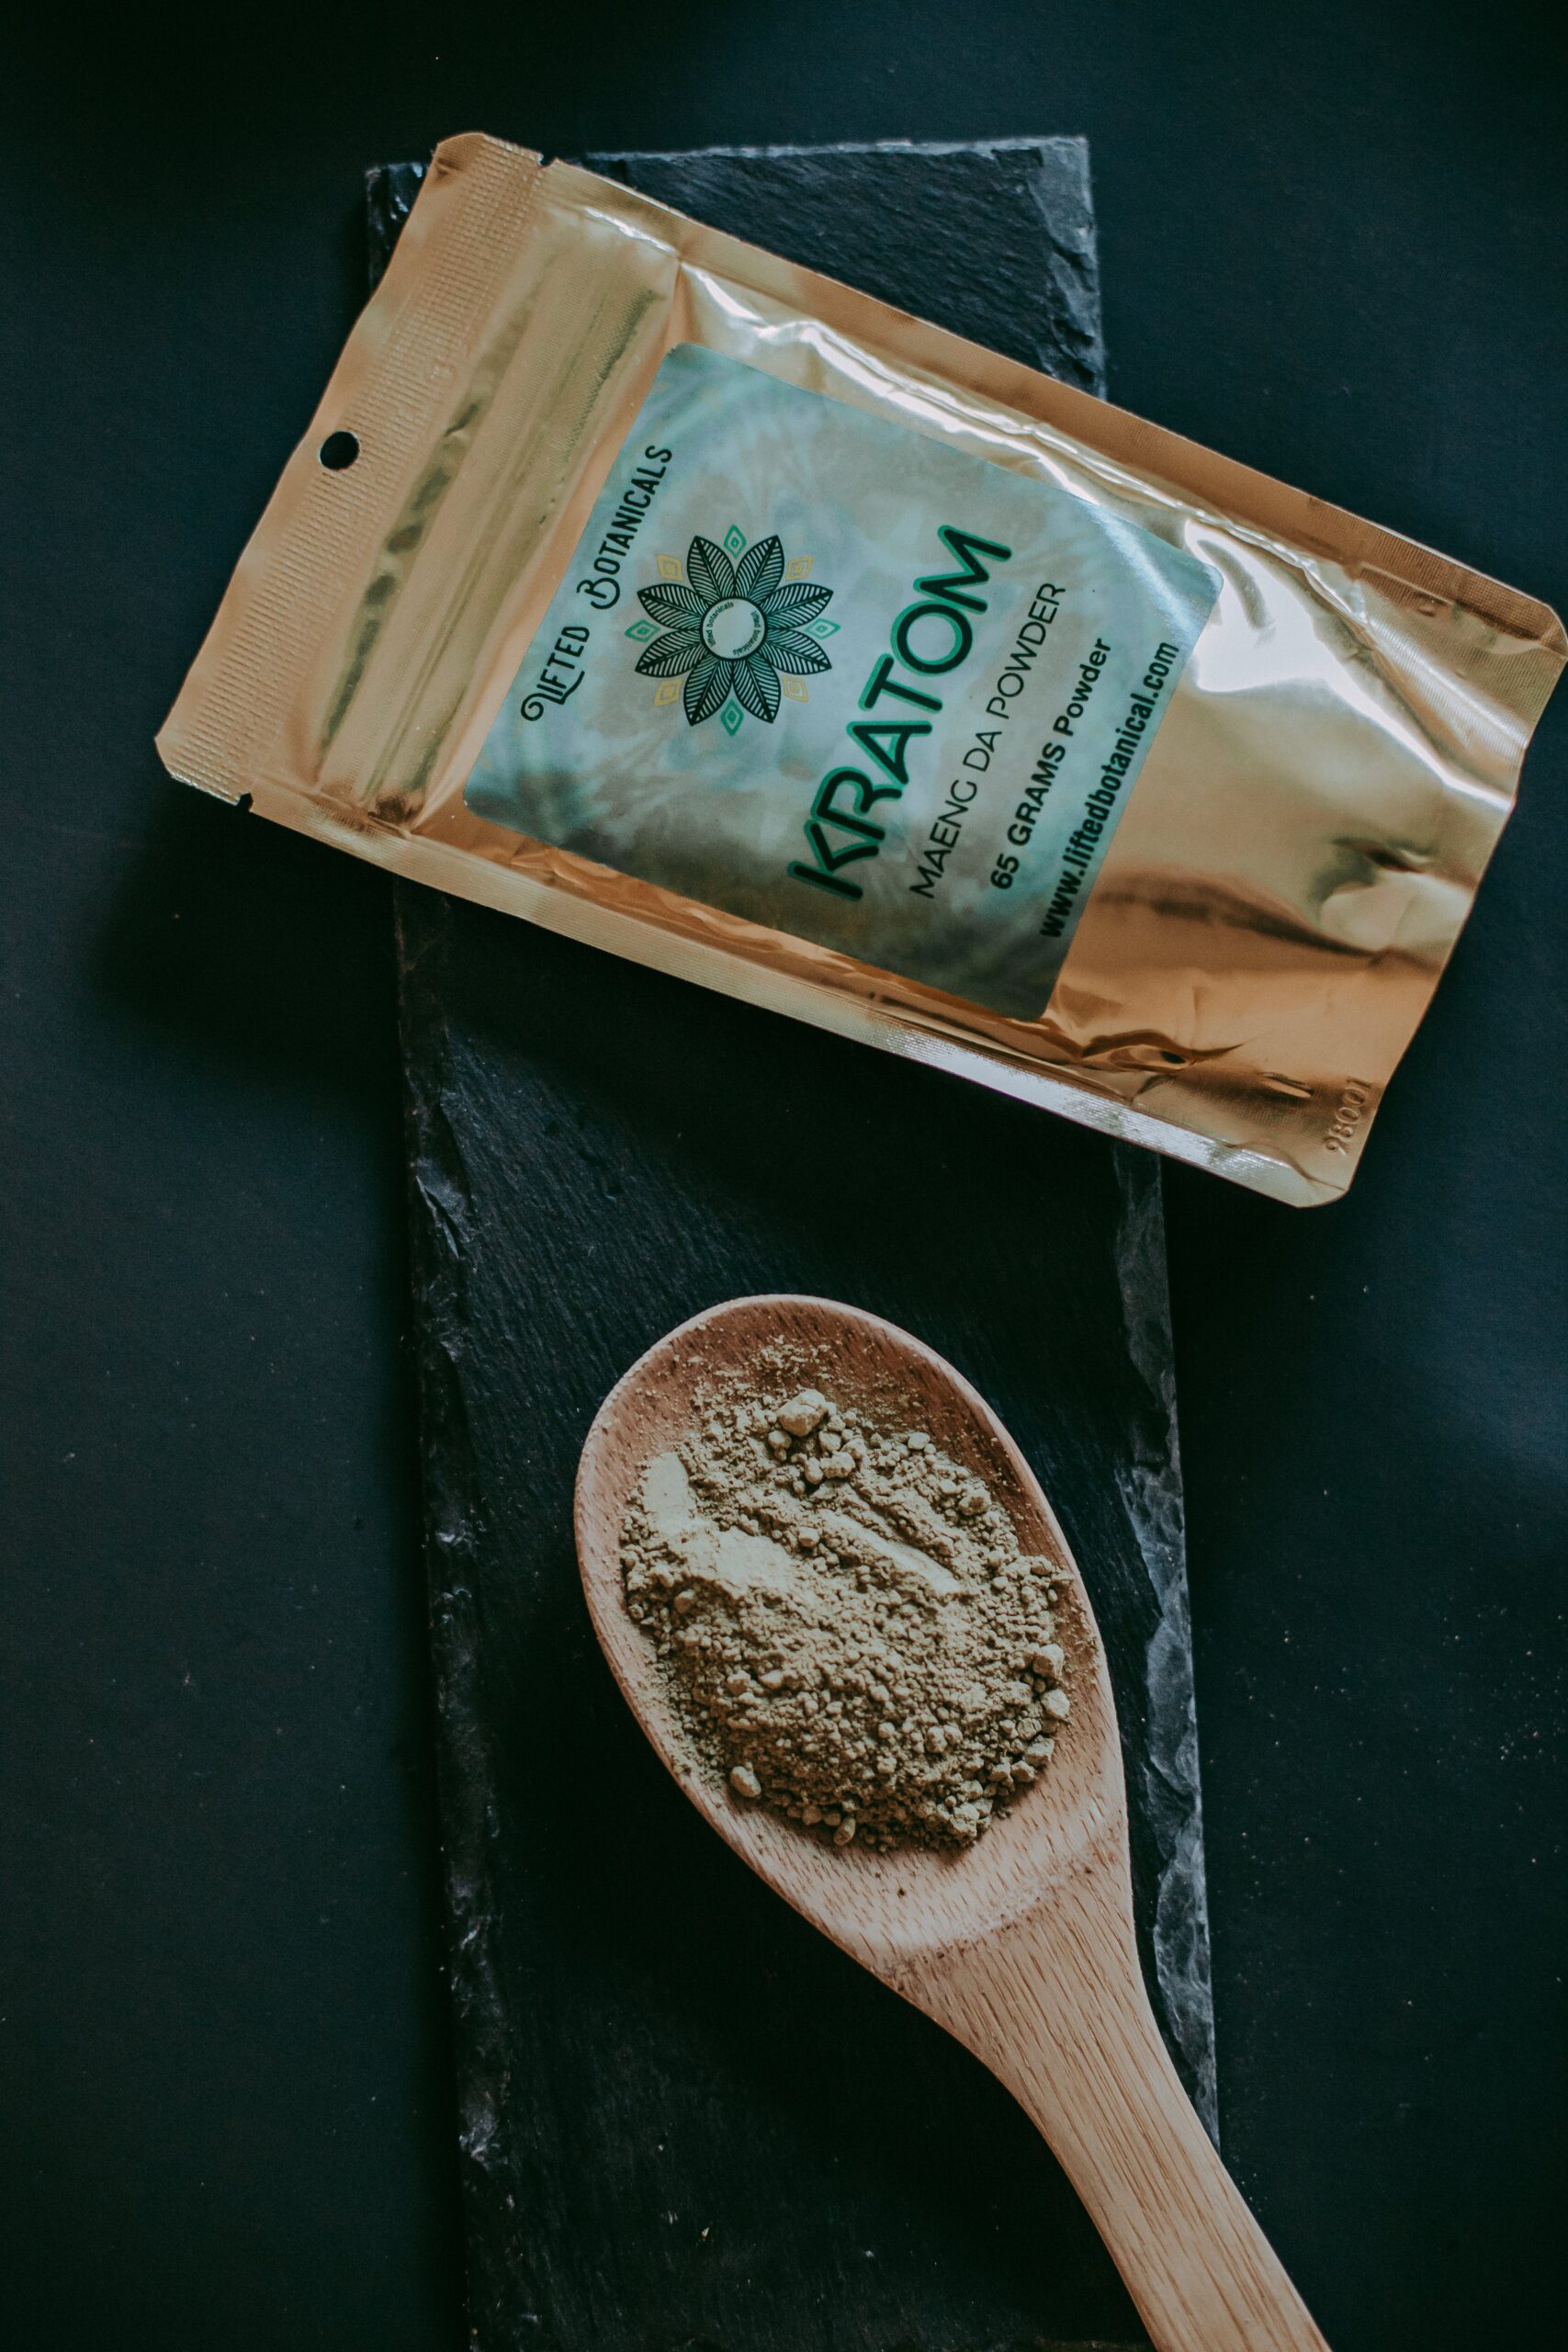 Kratom 101 Understanding the Different Strains and Their Varied Effects